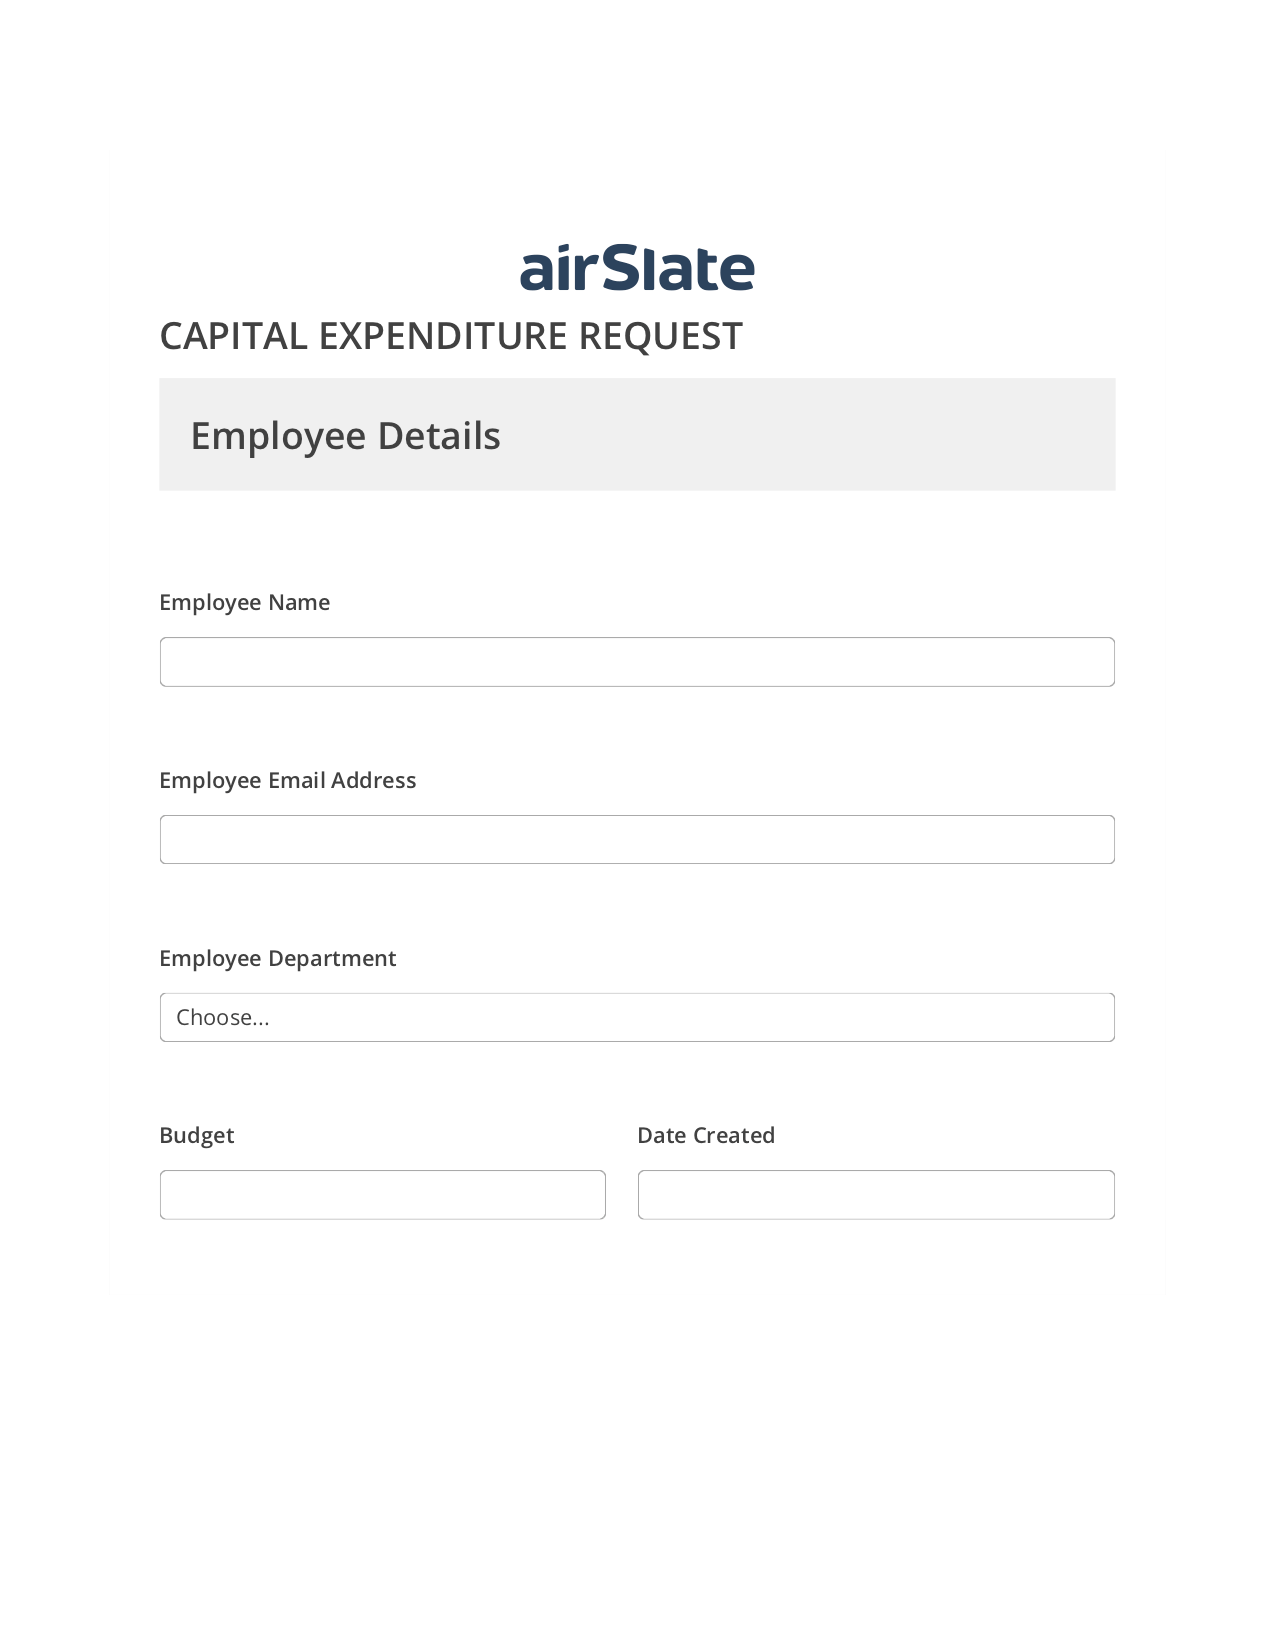 Multirole Capital Expenditure Request Approval Workflow Pre-fill from MySQL Bot, Rename Slate Bot, Export to Google Sheet